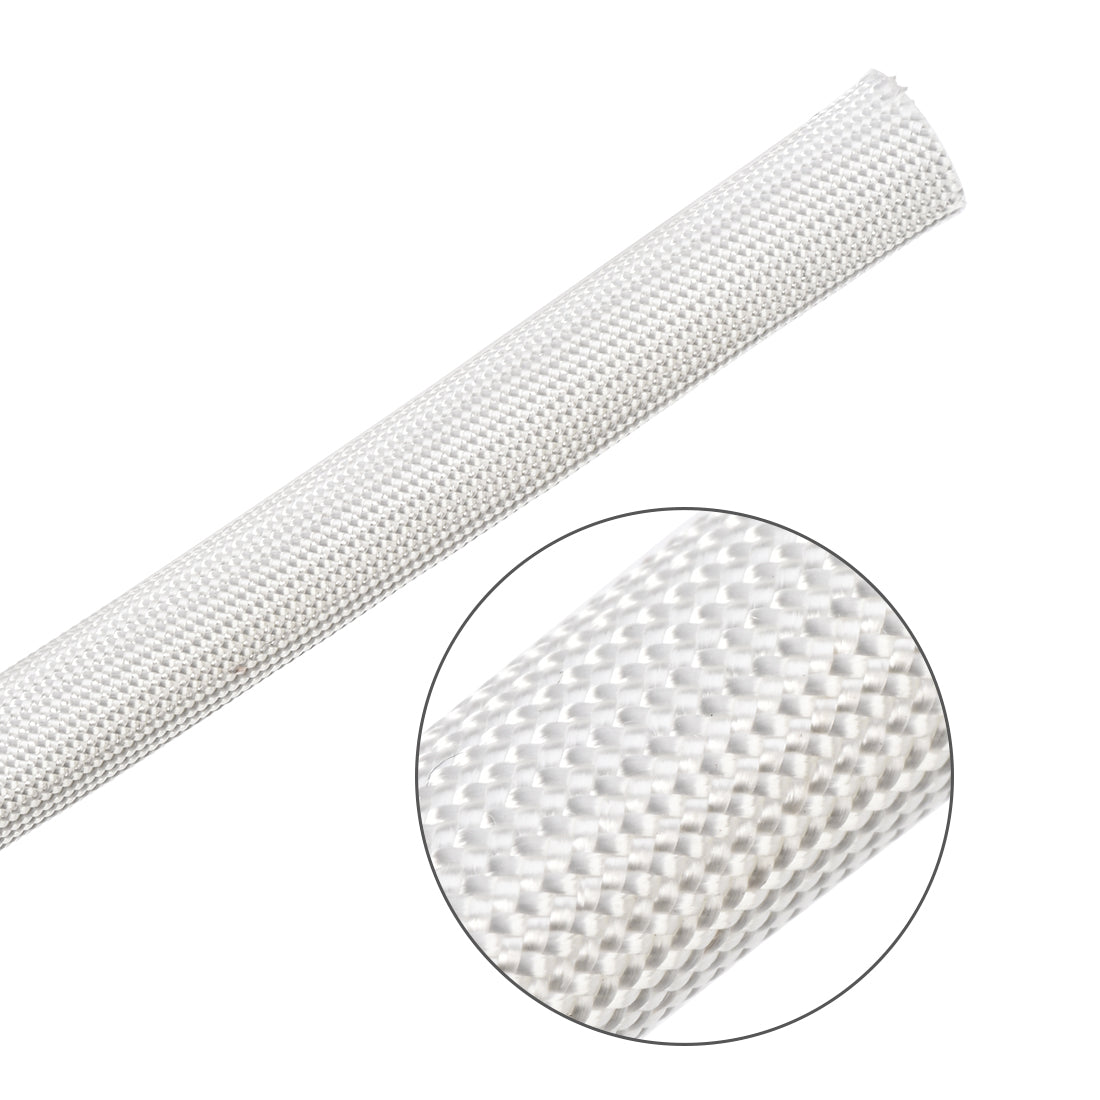 uxcell Uxcell Insulation Cable Protector, 9.8Ft-12mm High TEMP Fiberglass Sleeve White